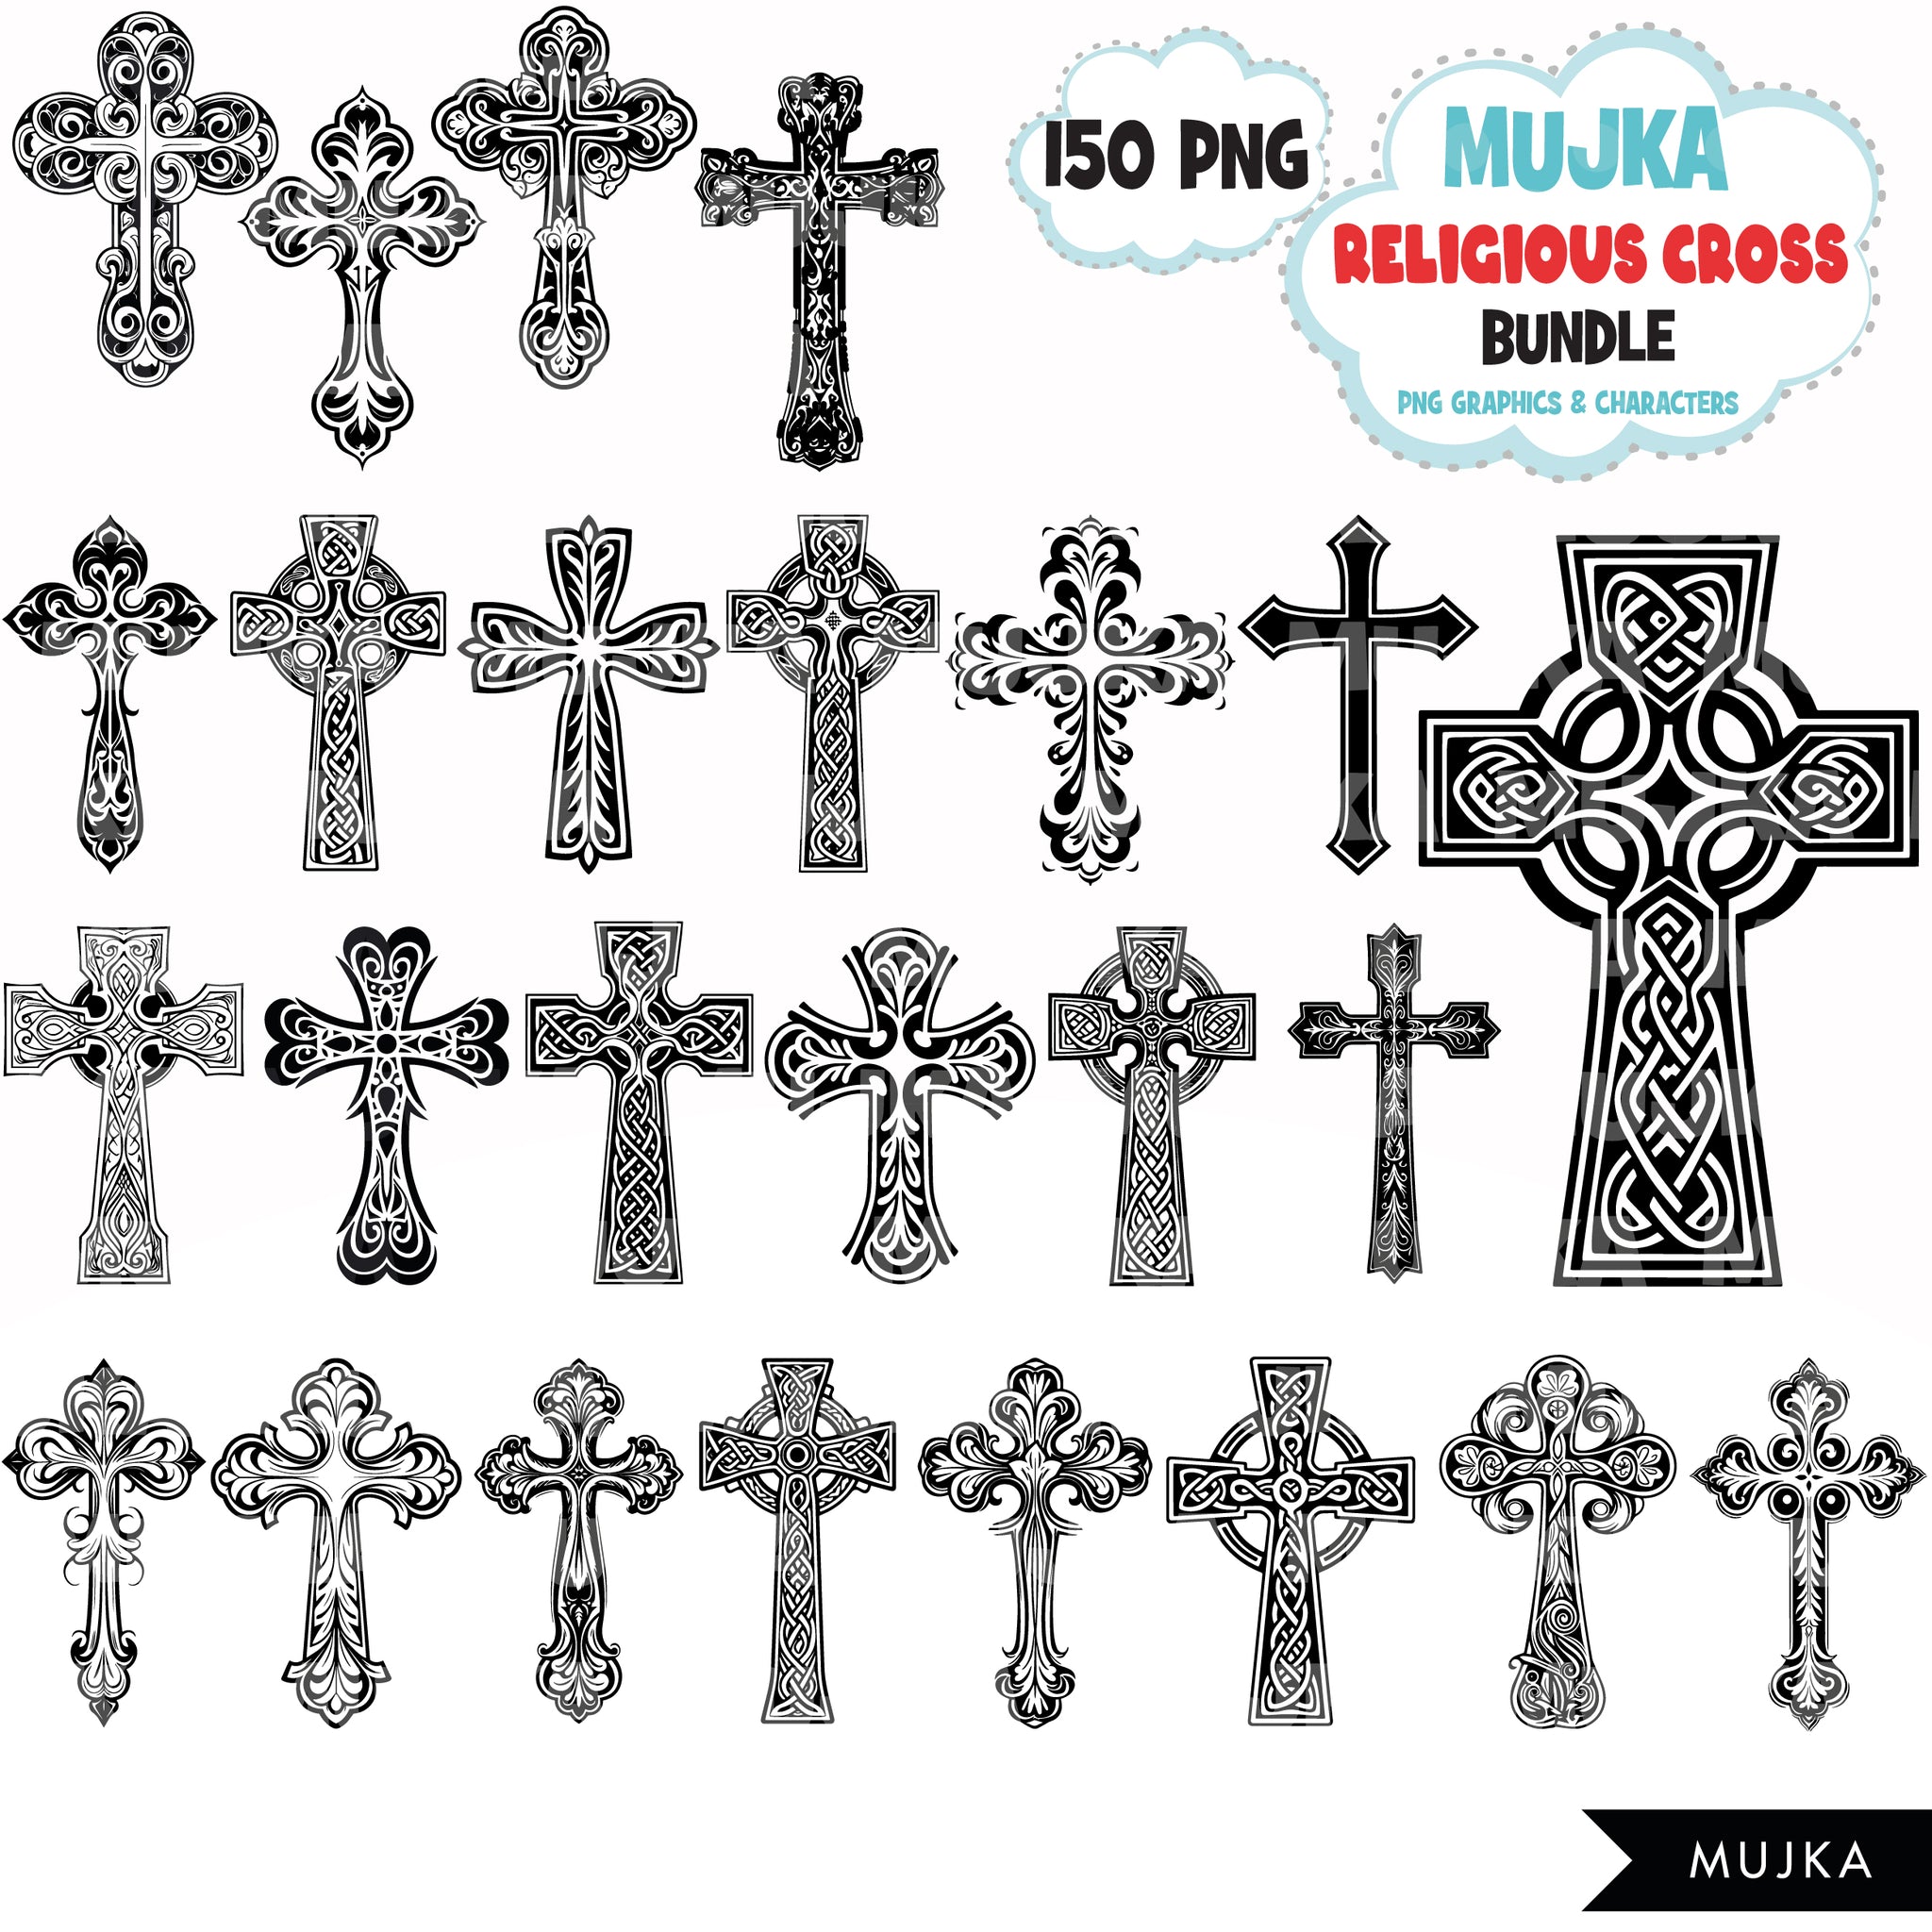 Religious Cross PNG Bundle, Christian png, Cross clipart, Catholic png ...